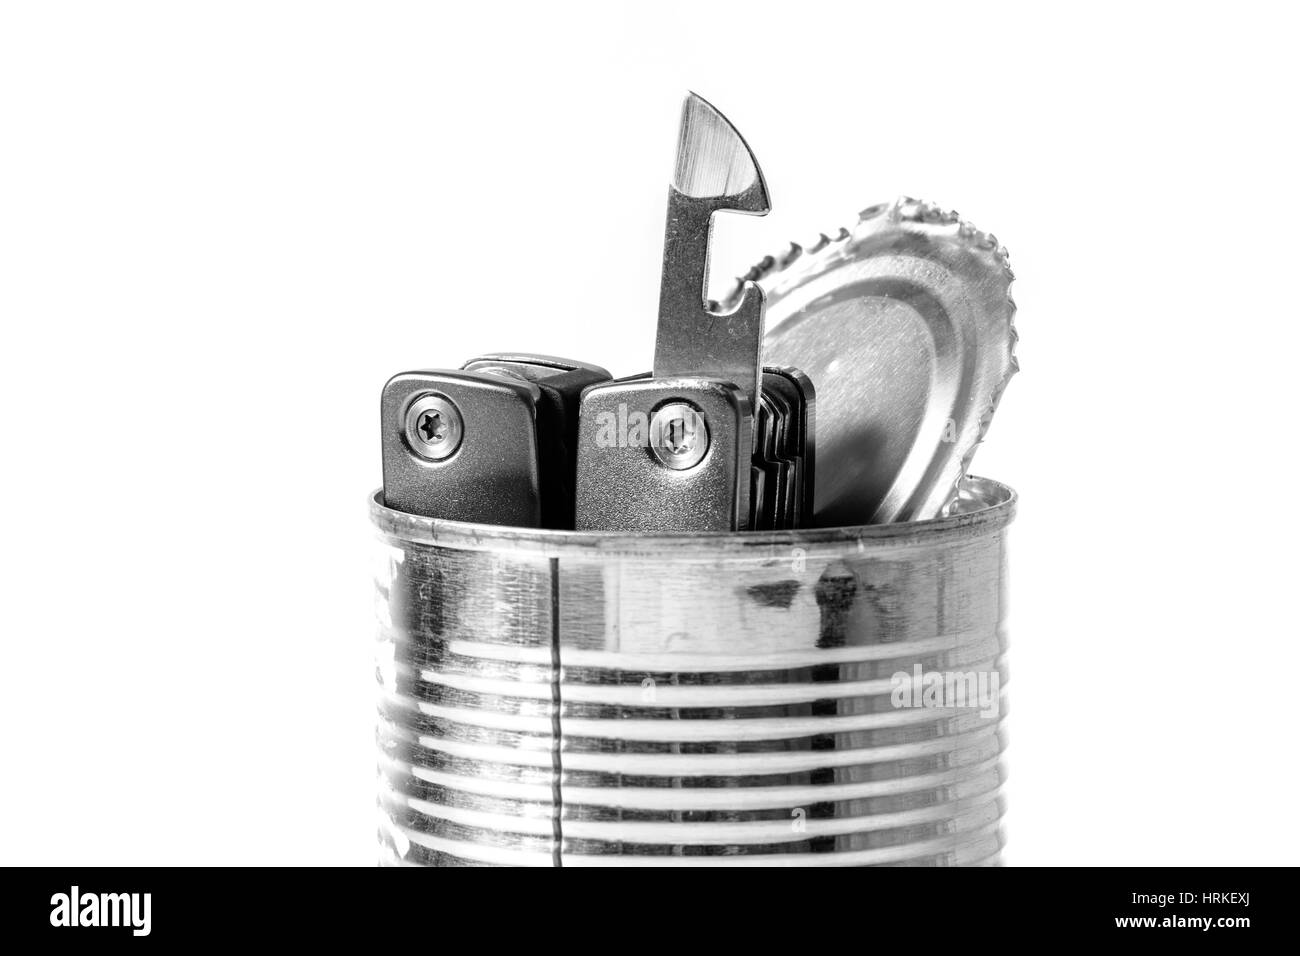 tin opener and opened tin, isolate object Stock Photo